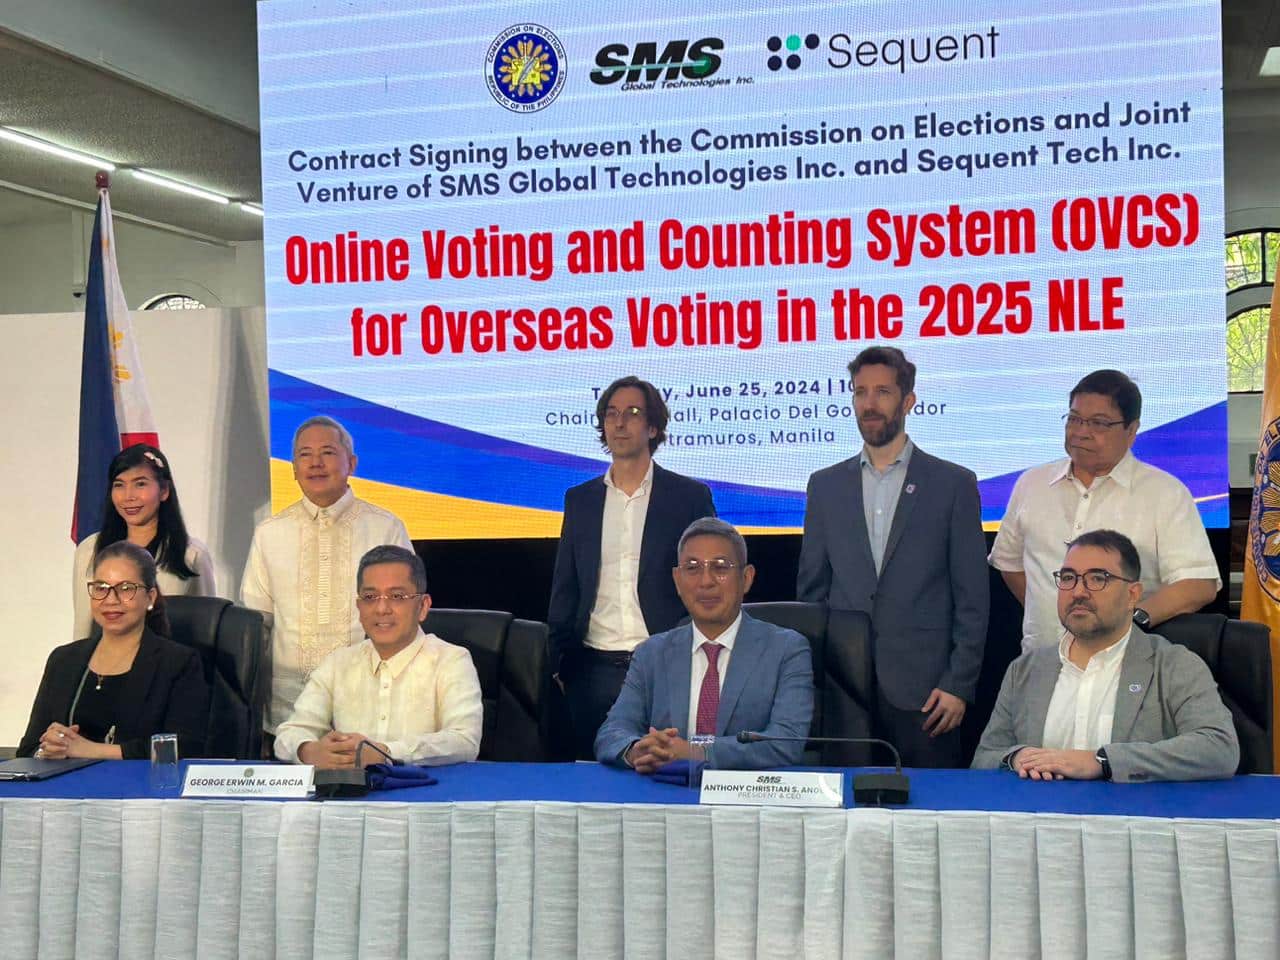 The Commission on Elections (Comelec) sealed the deal on Tuesday with the joint venture of SMS Global Technologies Inc. and Sequent Tech Inc. for the first-ever online voting and counting system (OVCS) for Filipino overseas voters.